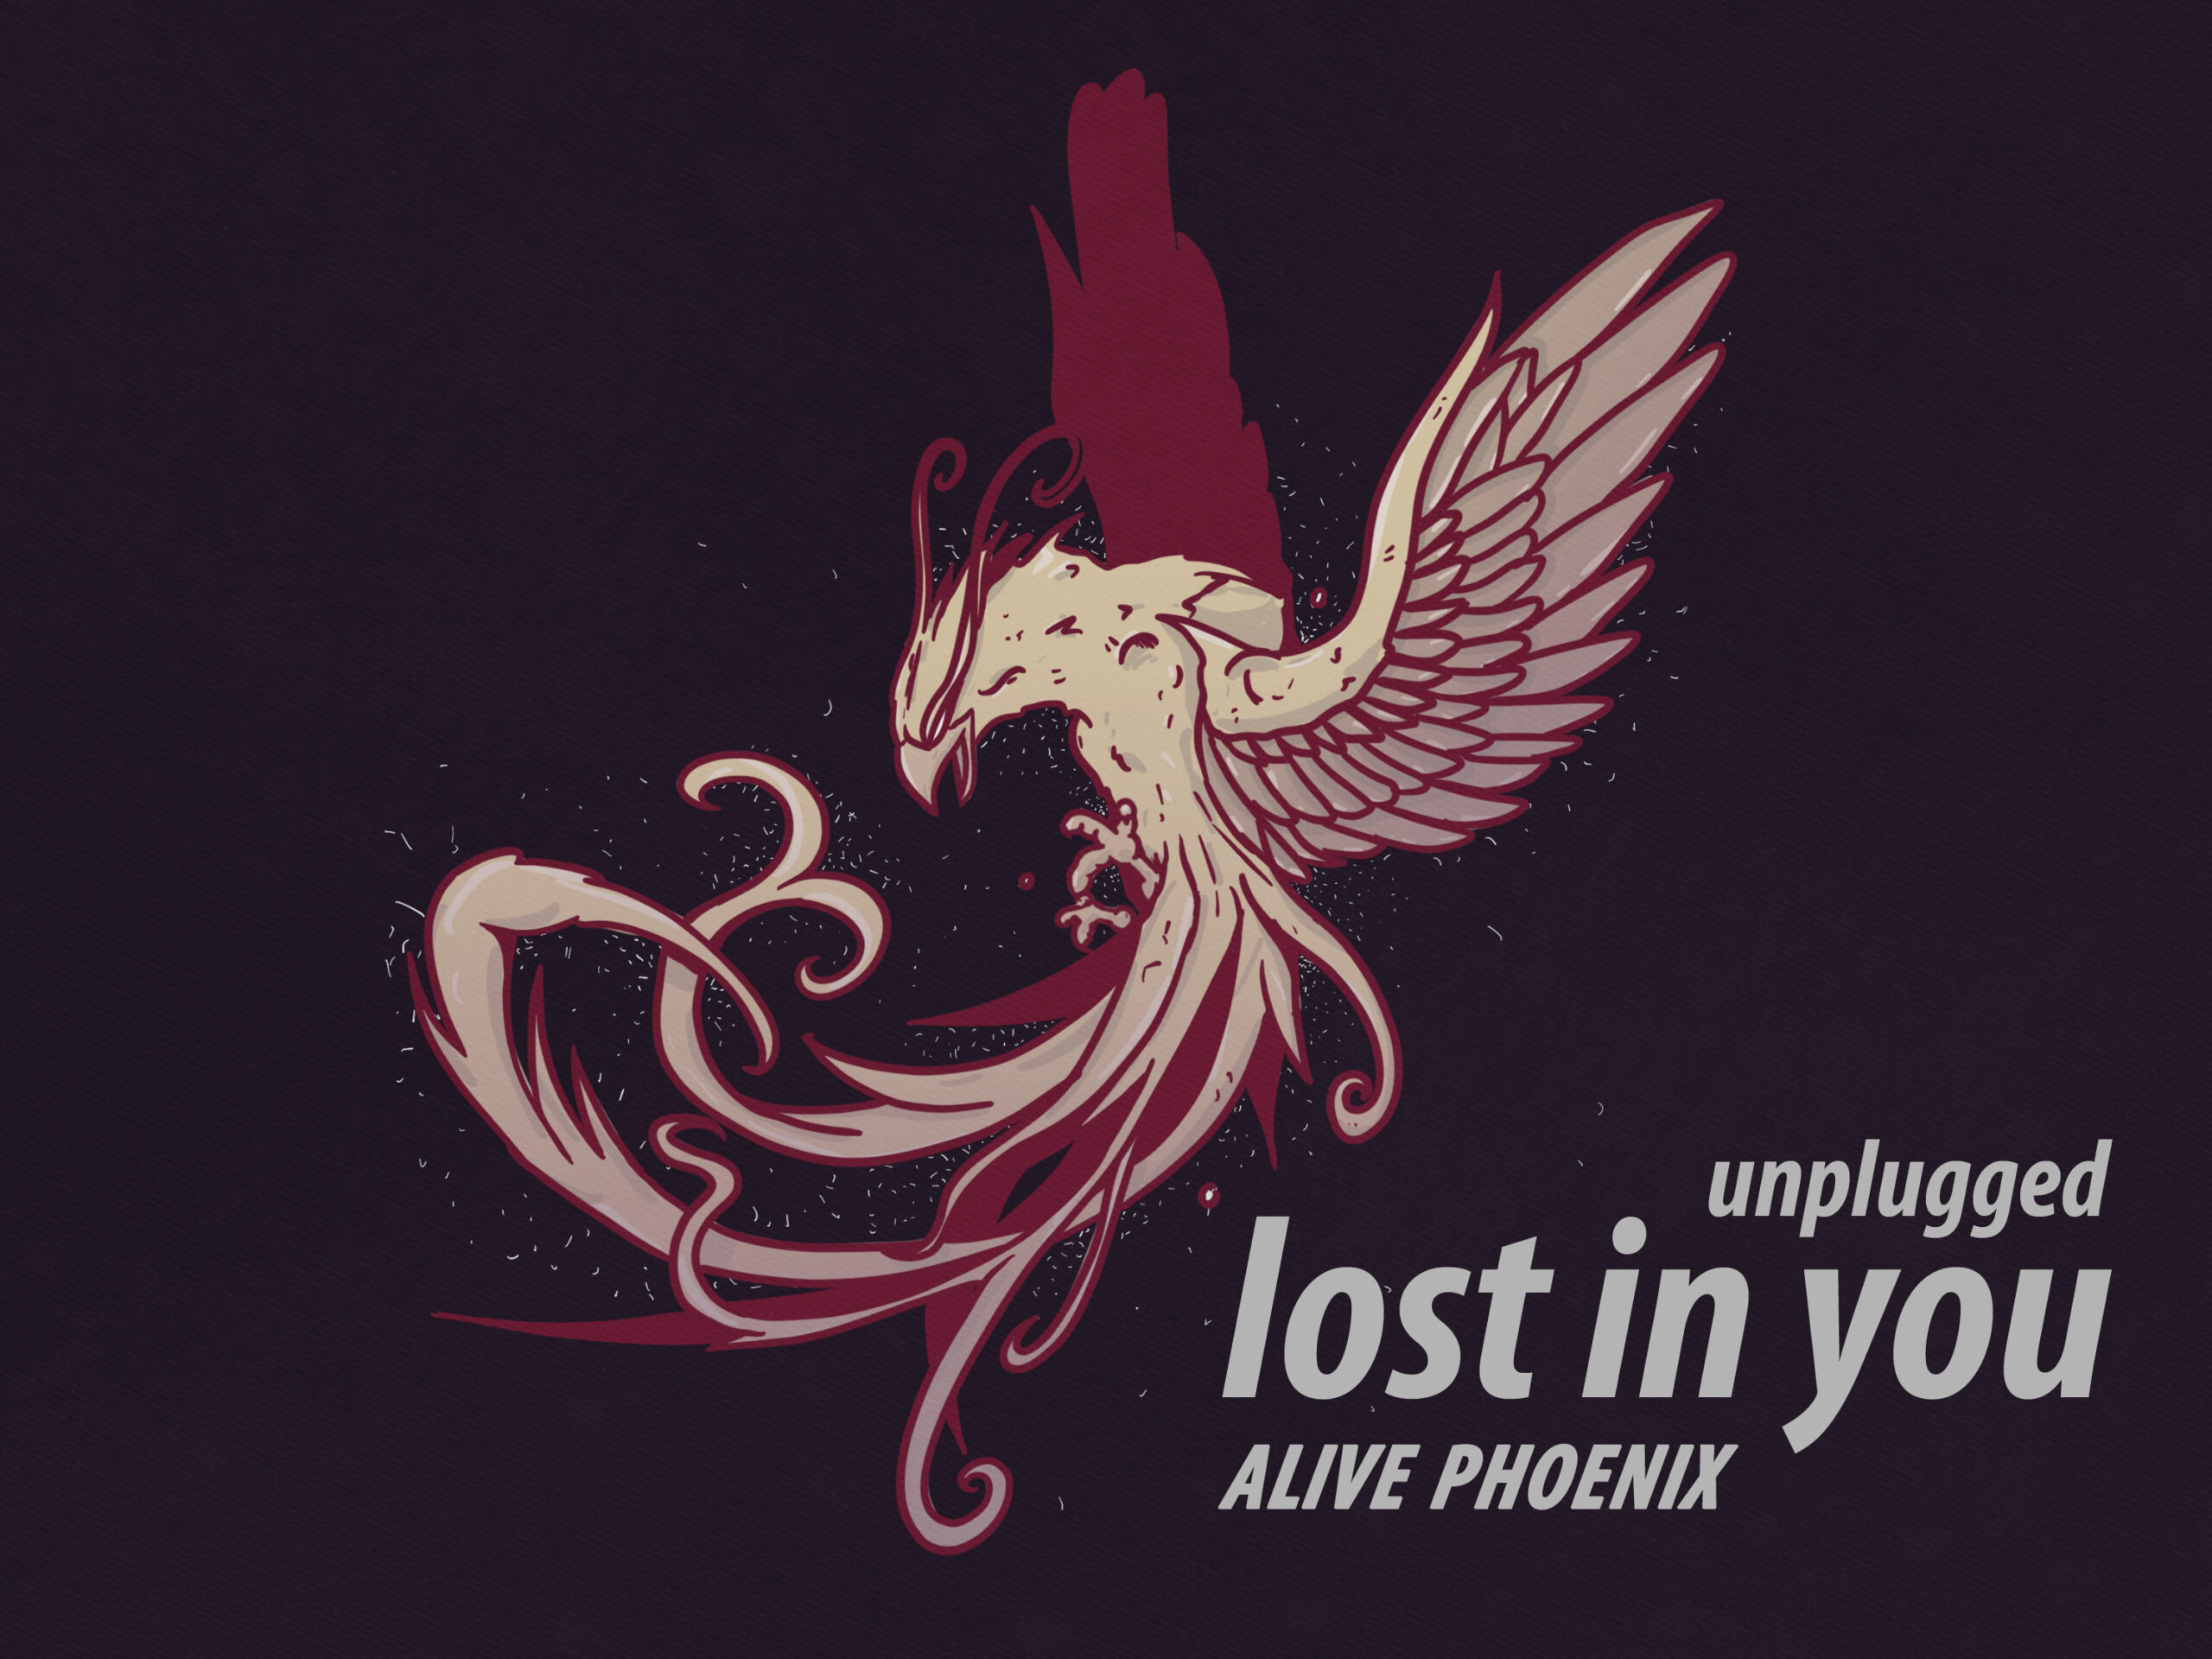 ALIVE PHOENIX - lost in you - unplugged